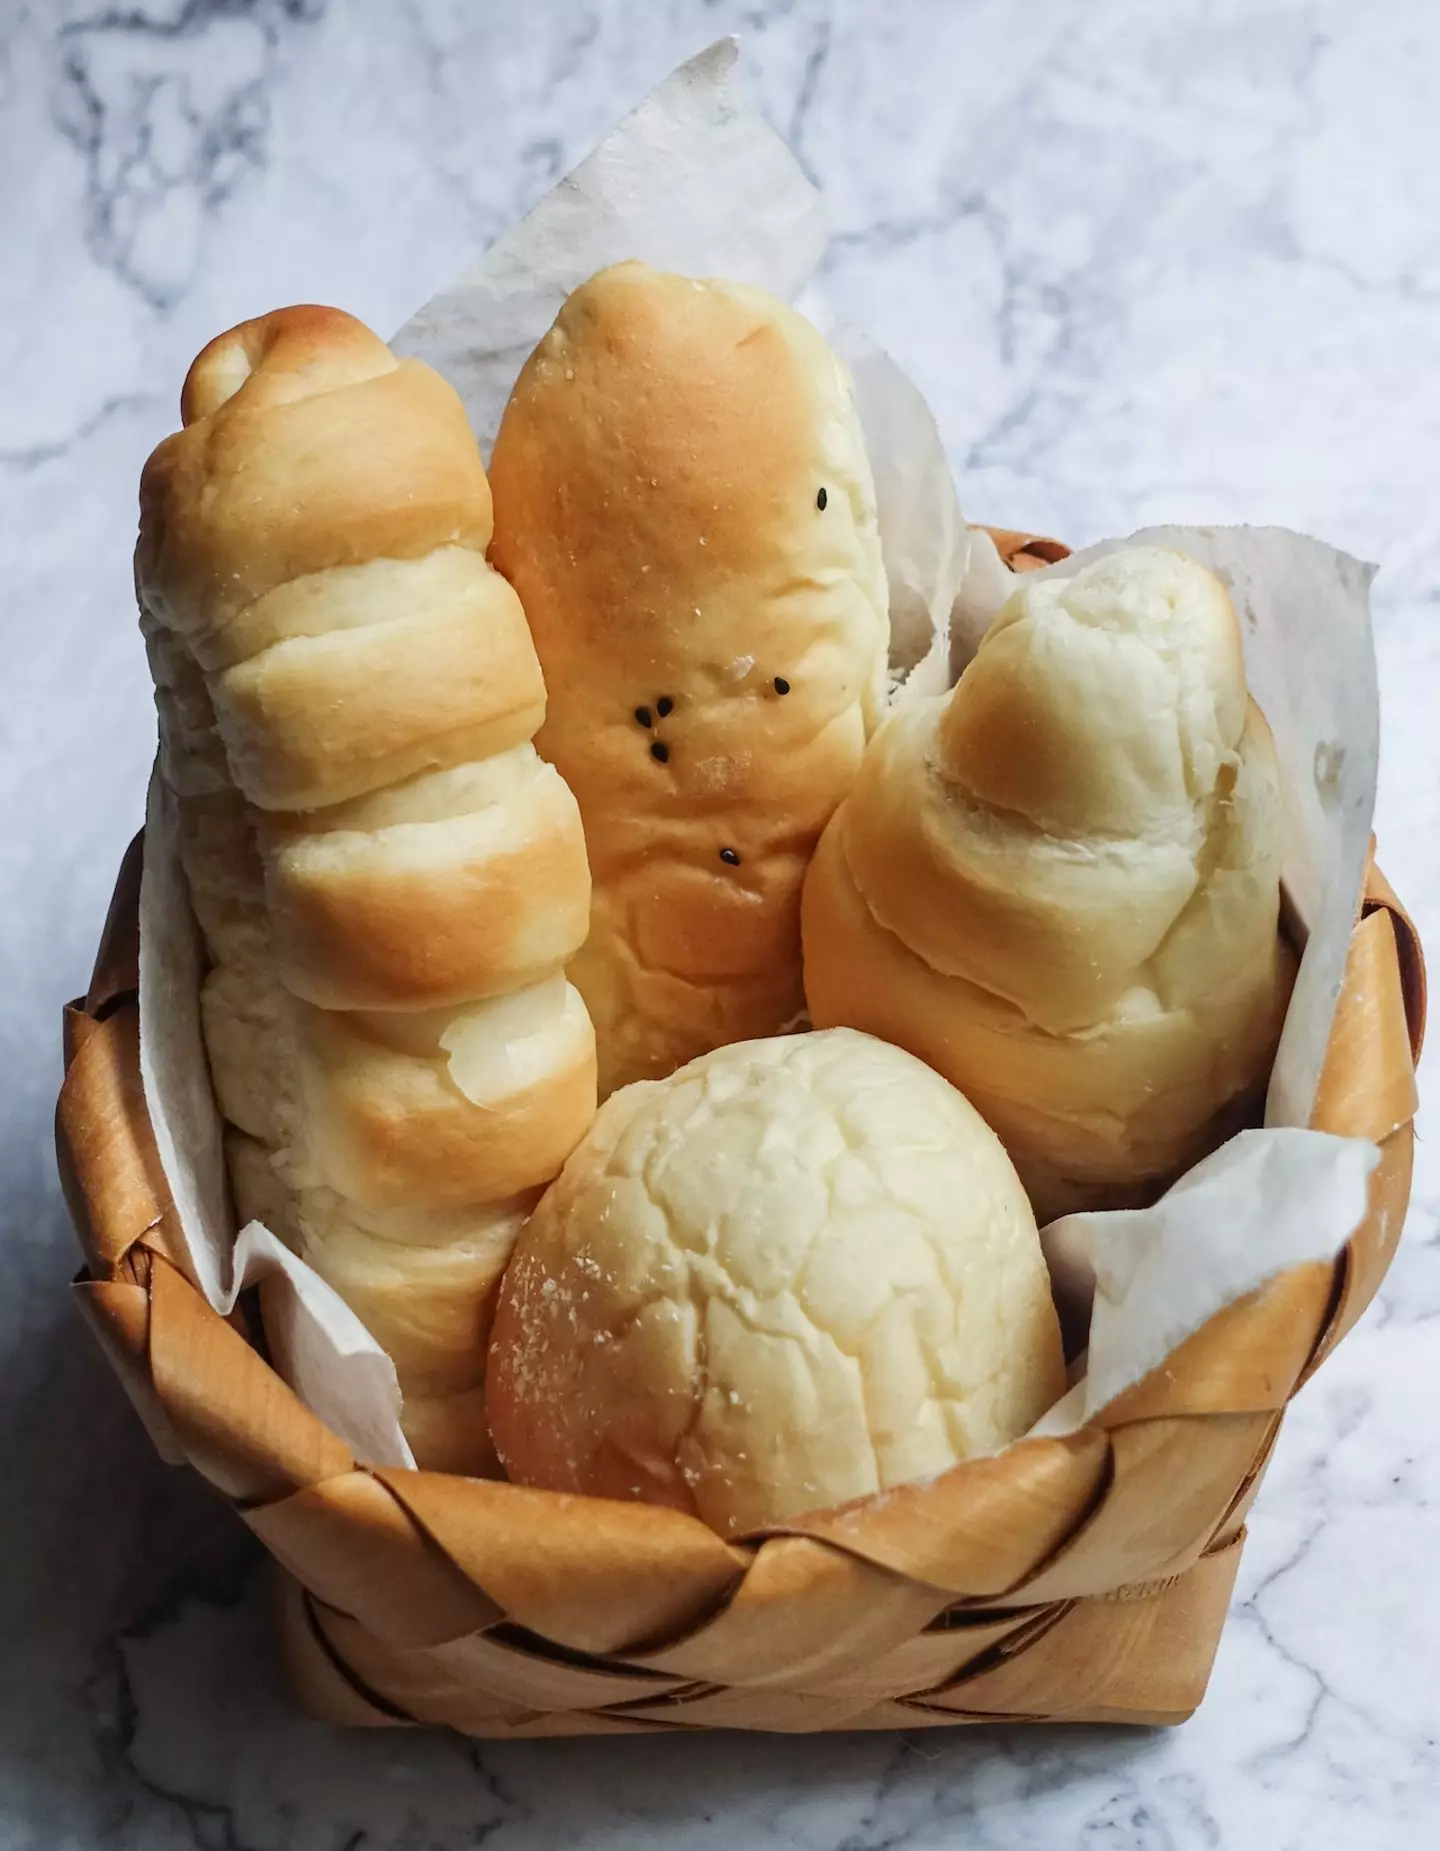 The 'real reason' why restaurants give out free bread at the start of a meal has been revealed.